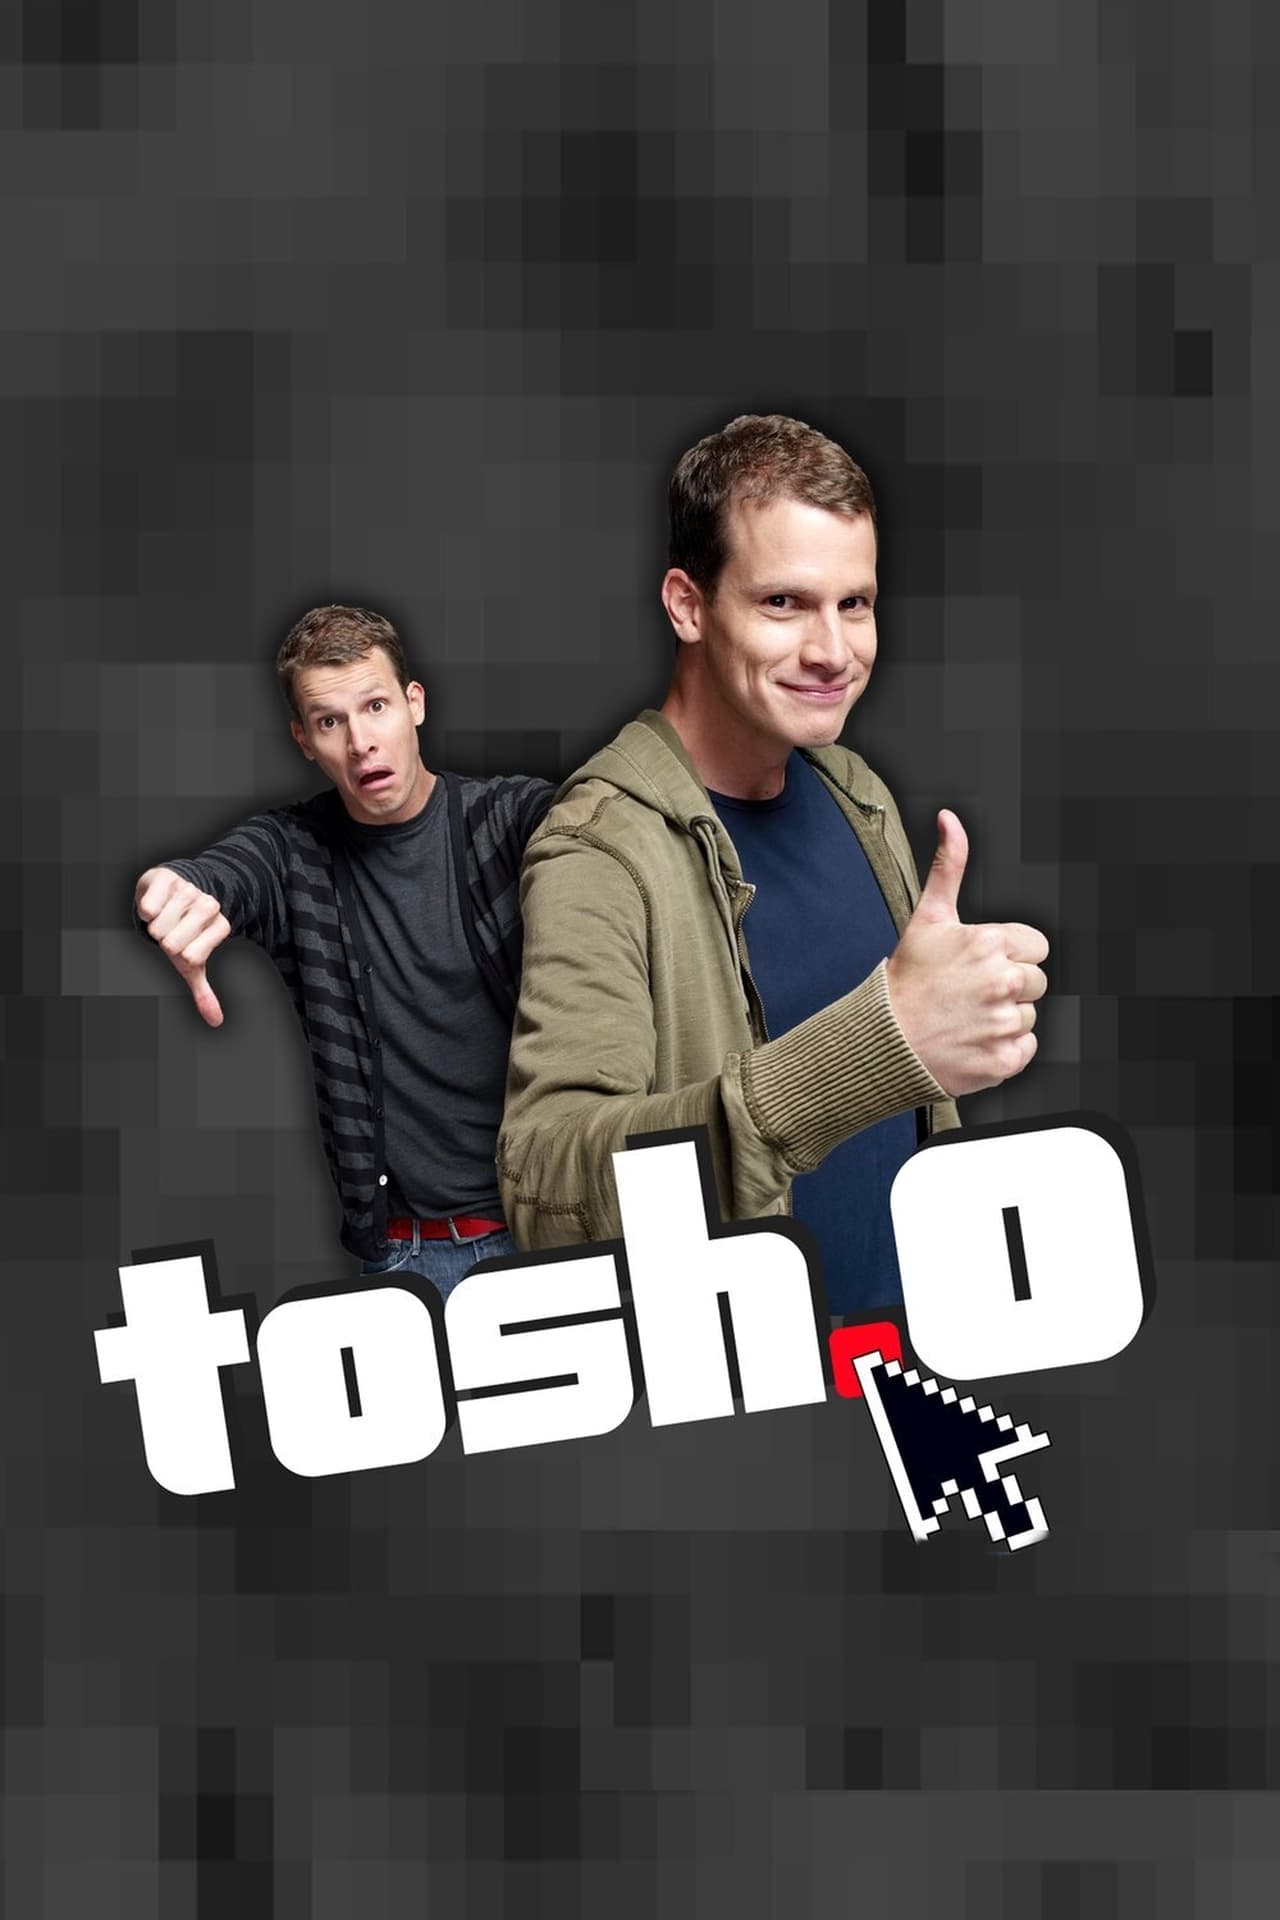 Tosh.0, Vol. 10 release date, trailers, cast, synopsis and reviews